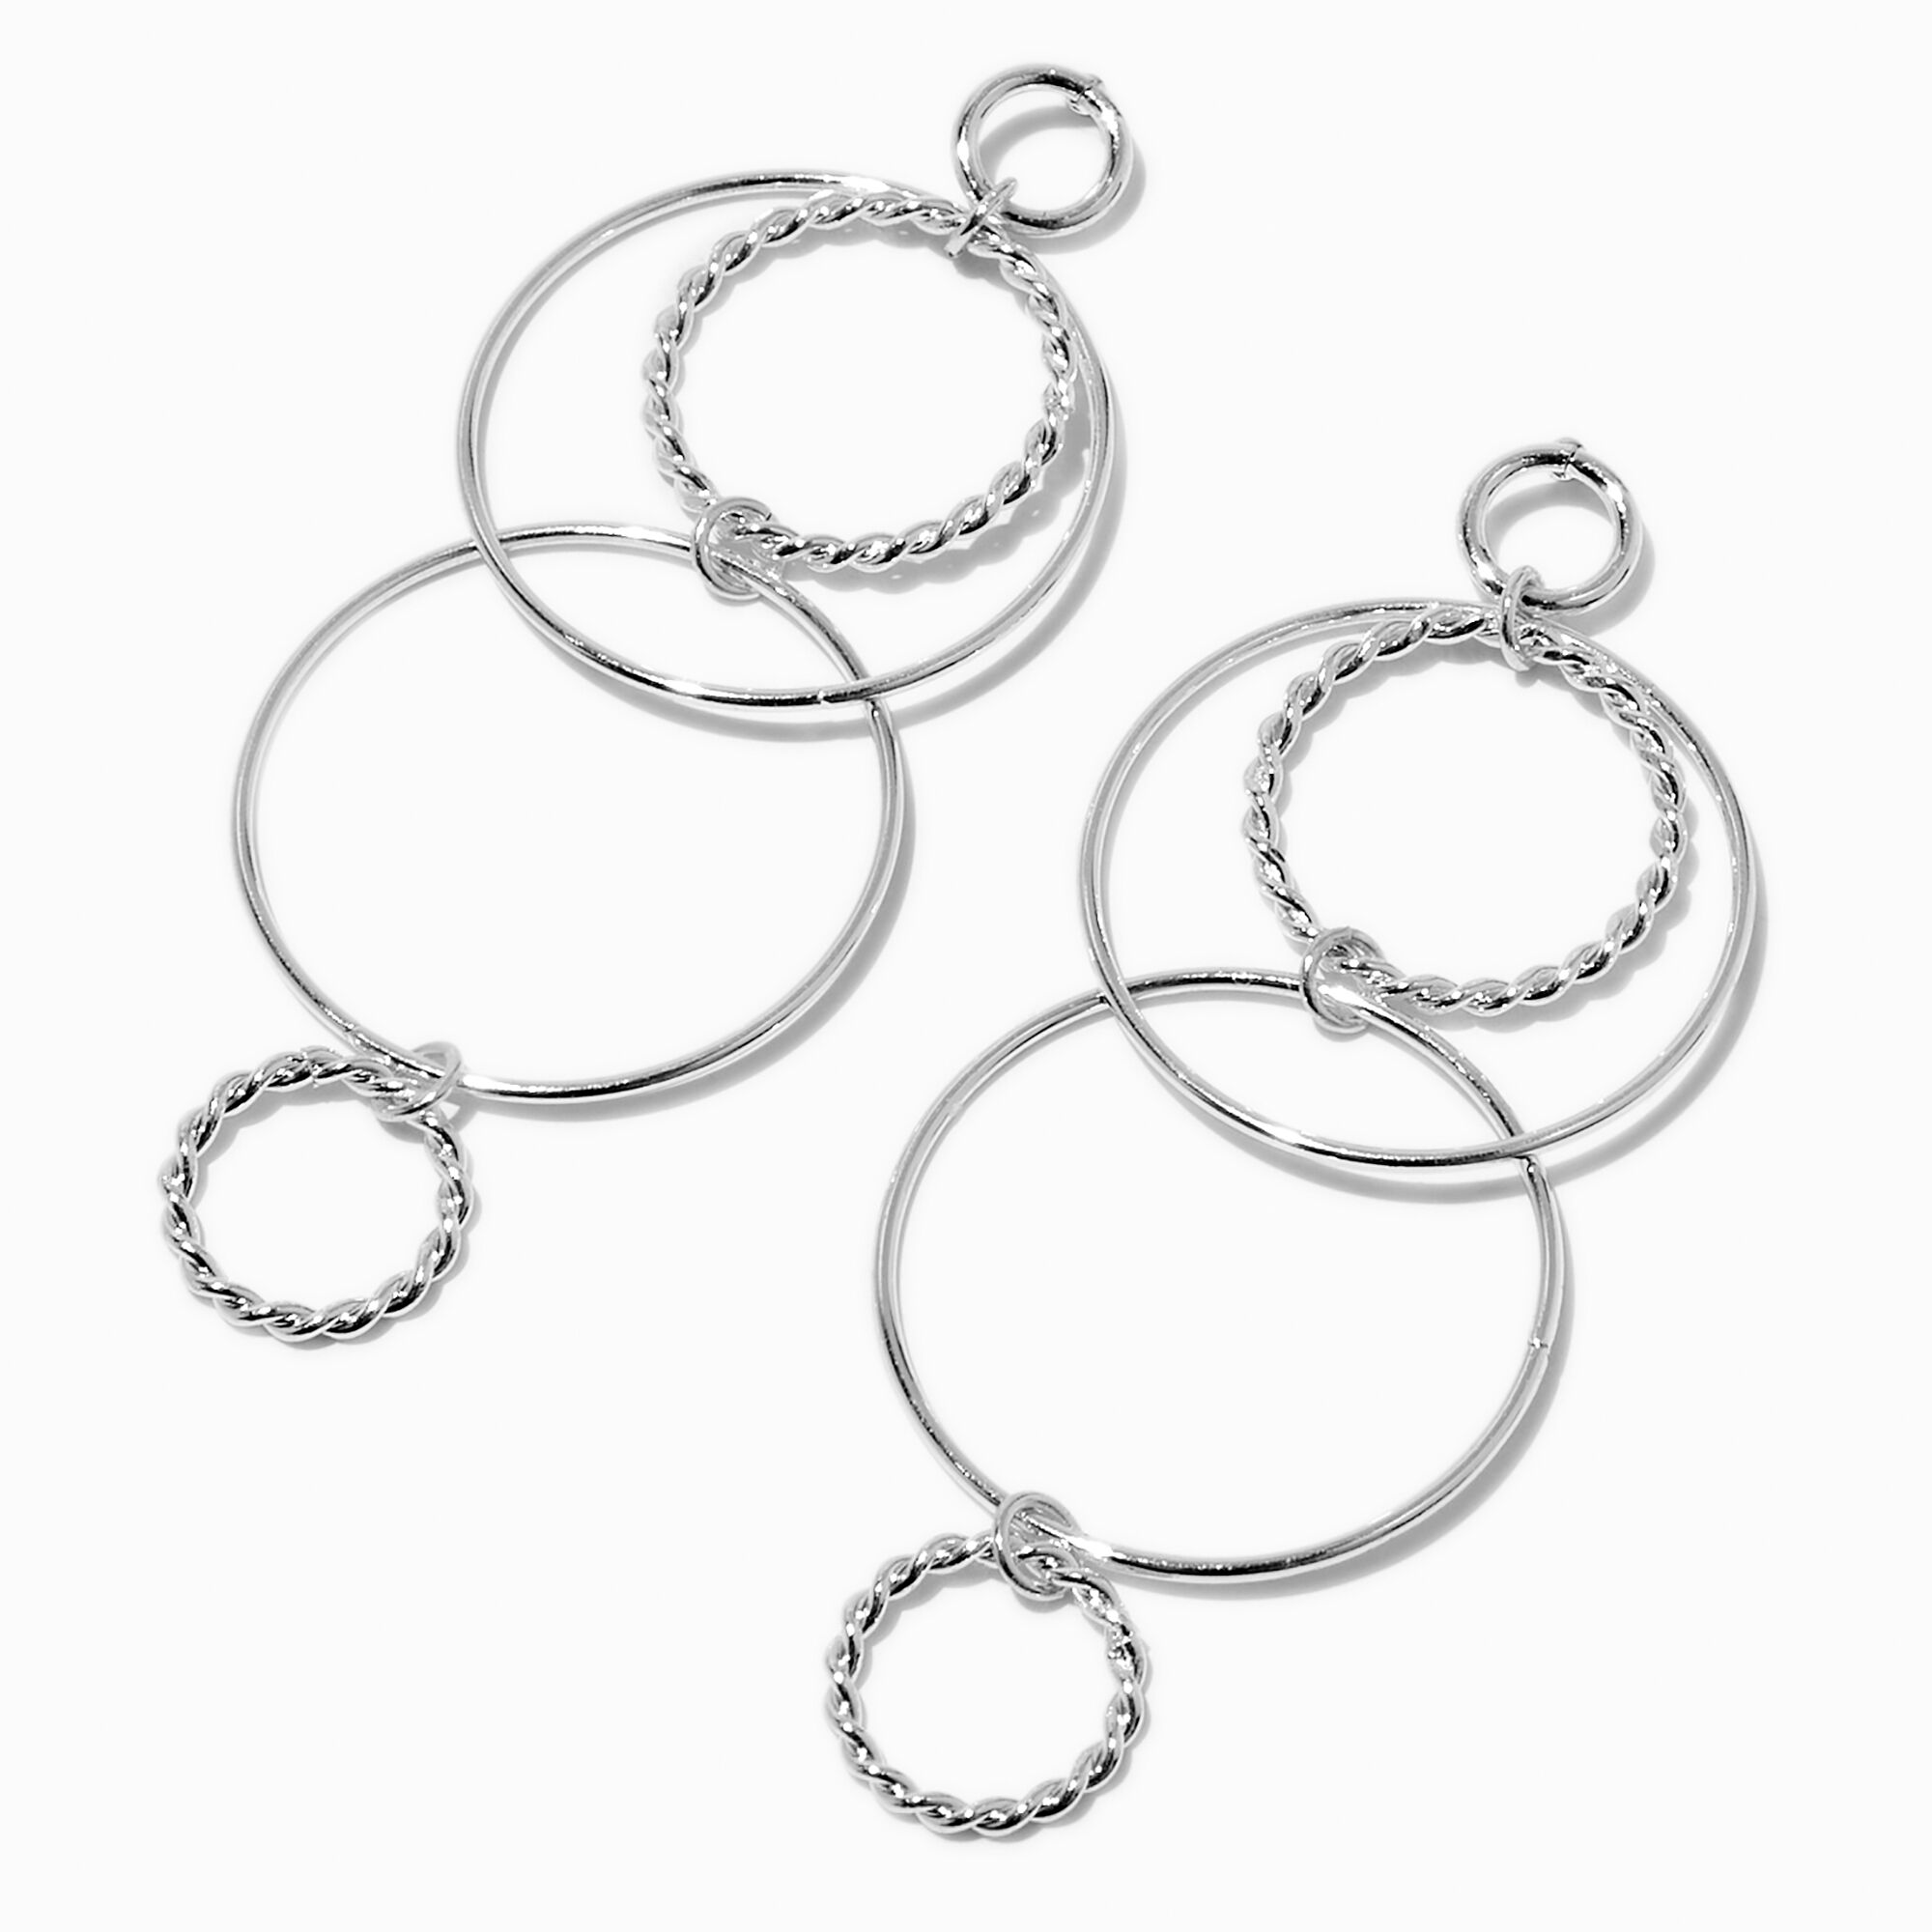 View Claires Tone Intertwined Rings 3 Drop Earrings Silver information